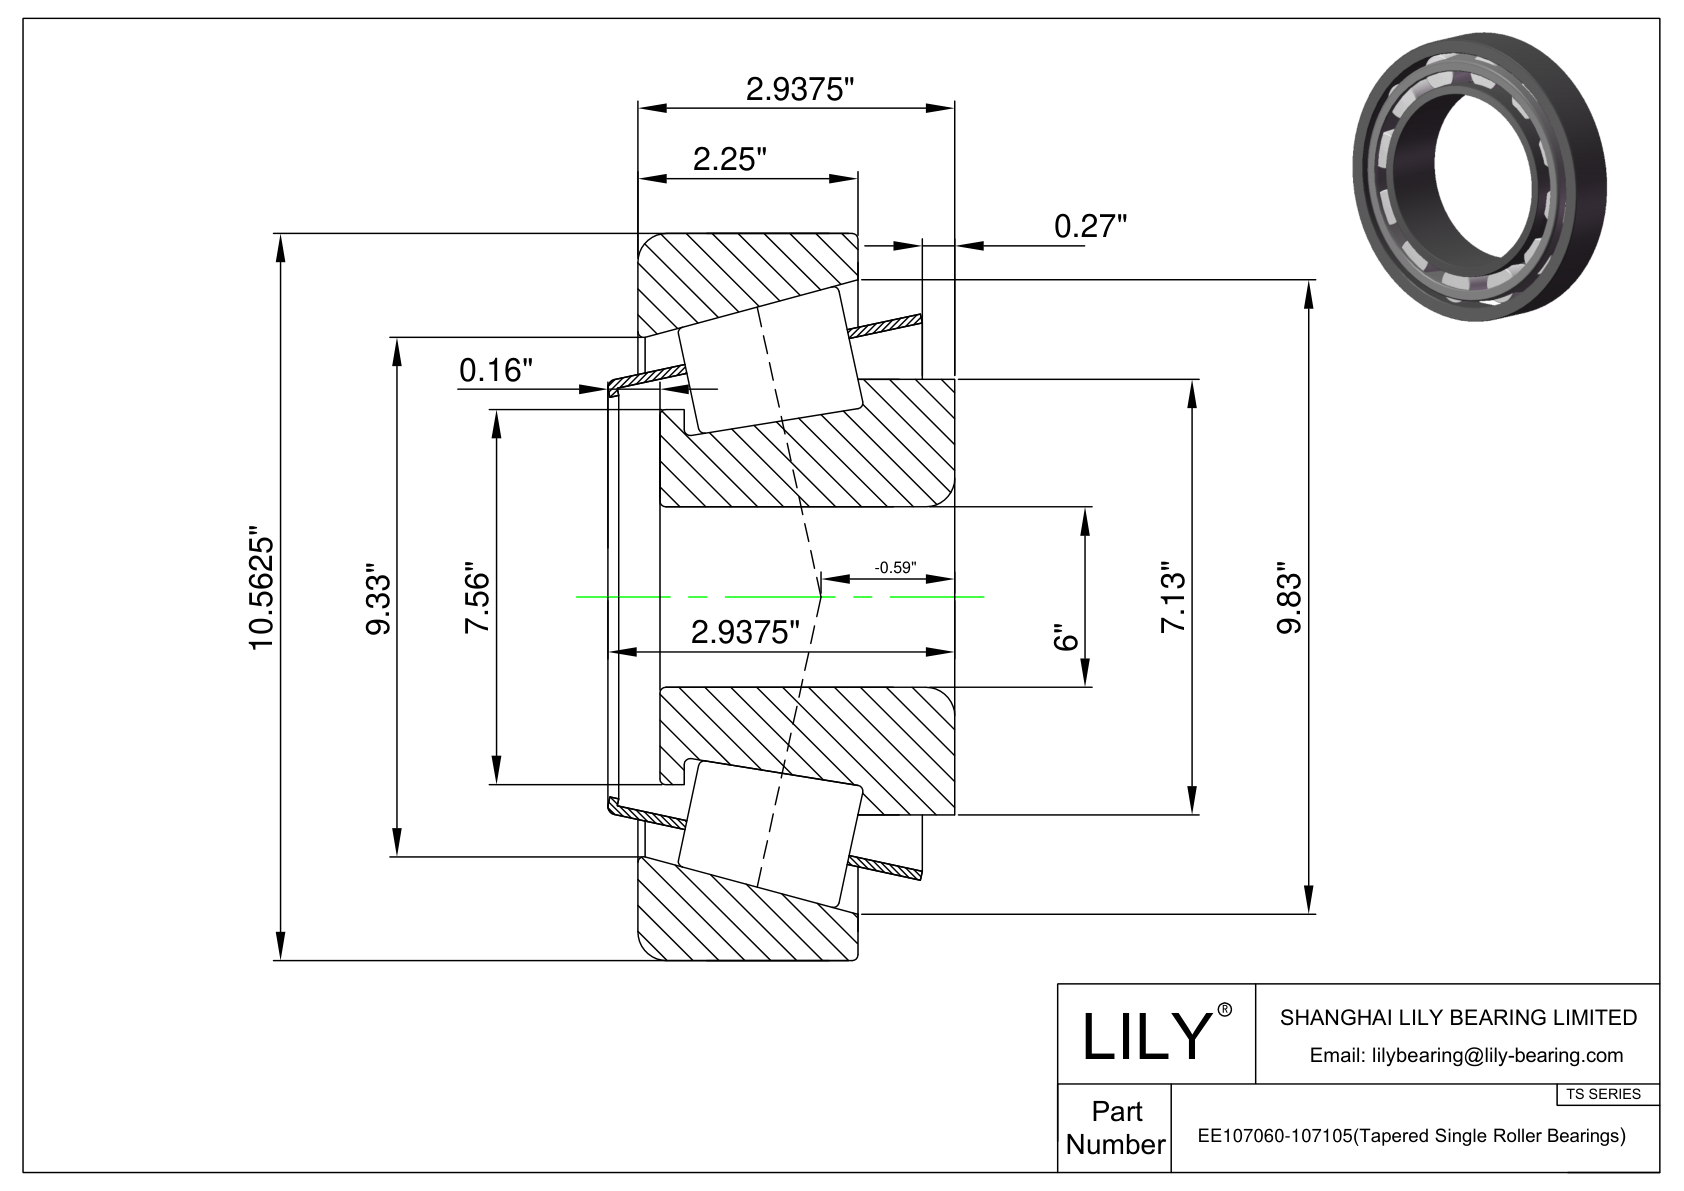 EE107060-107105 TS (Tapered Single Roller Bearings) (Imperial) cad drawing